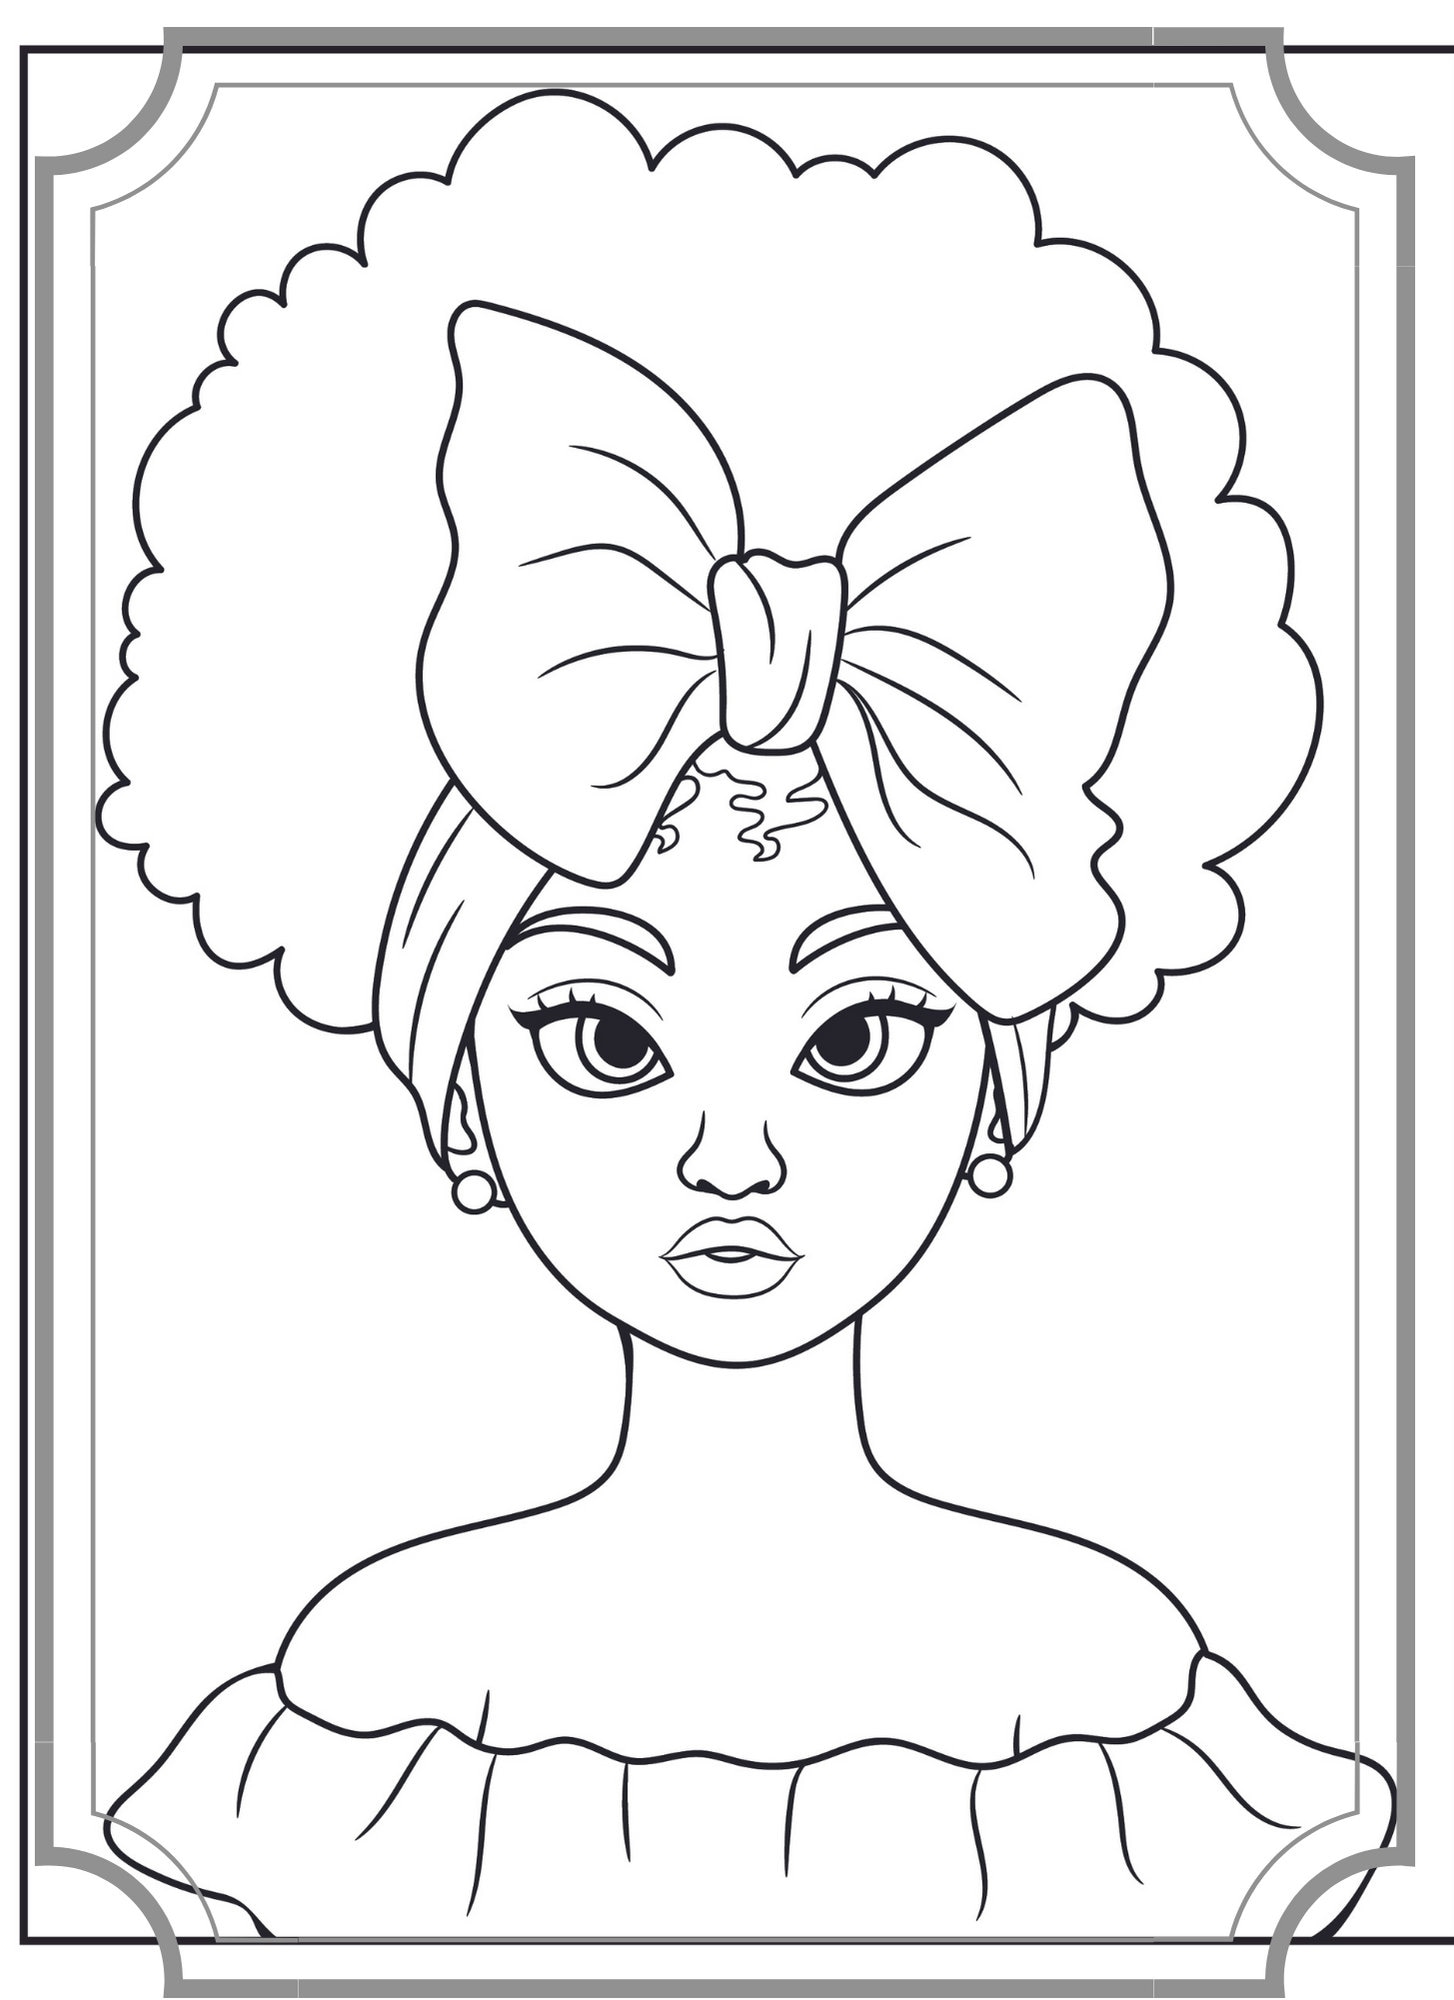 20 Black Girl Coloring Pages (Free PDF Printables)